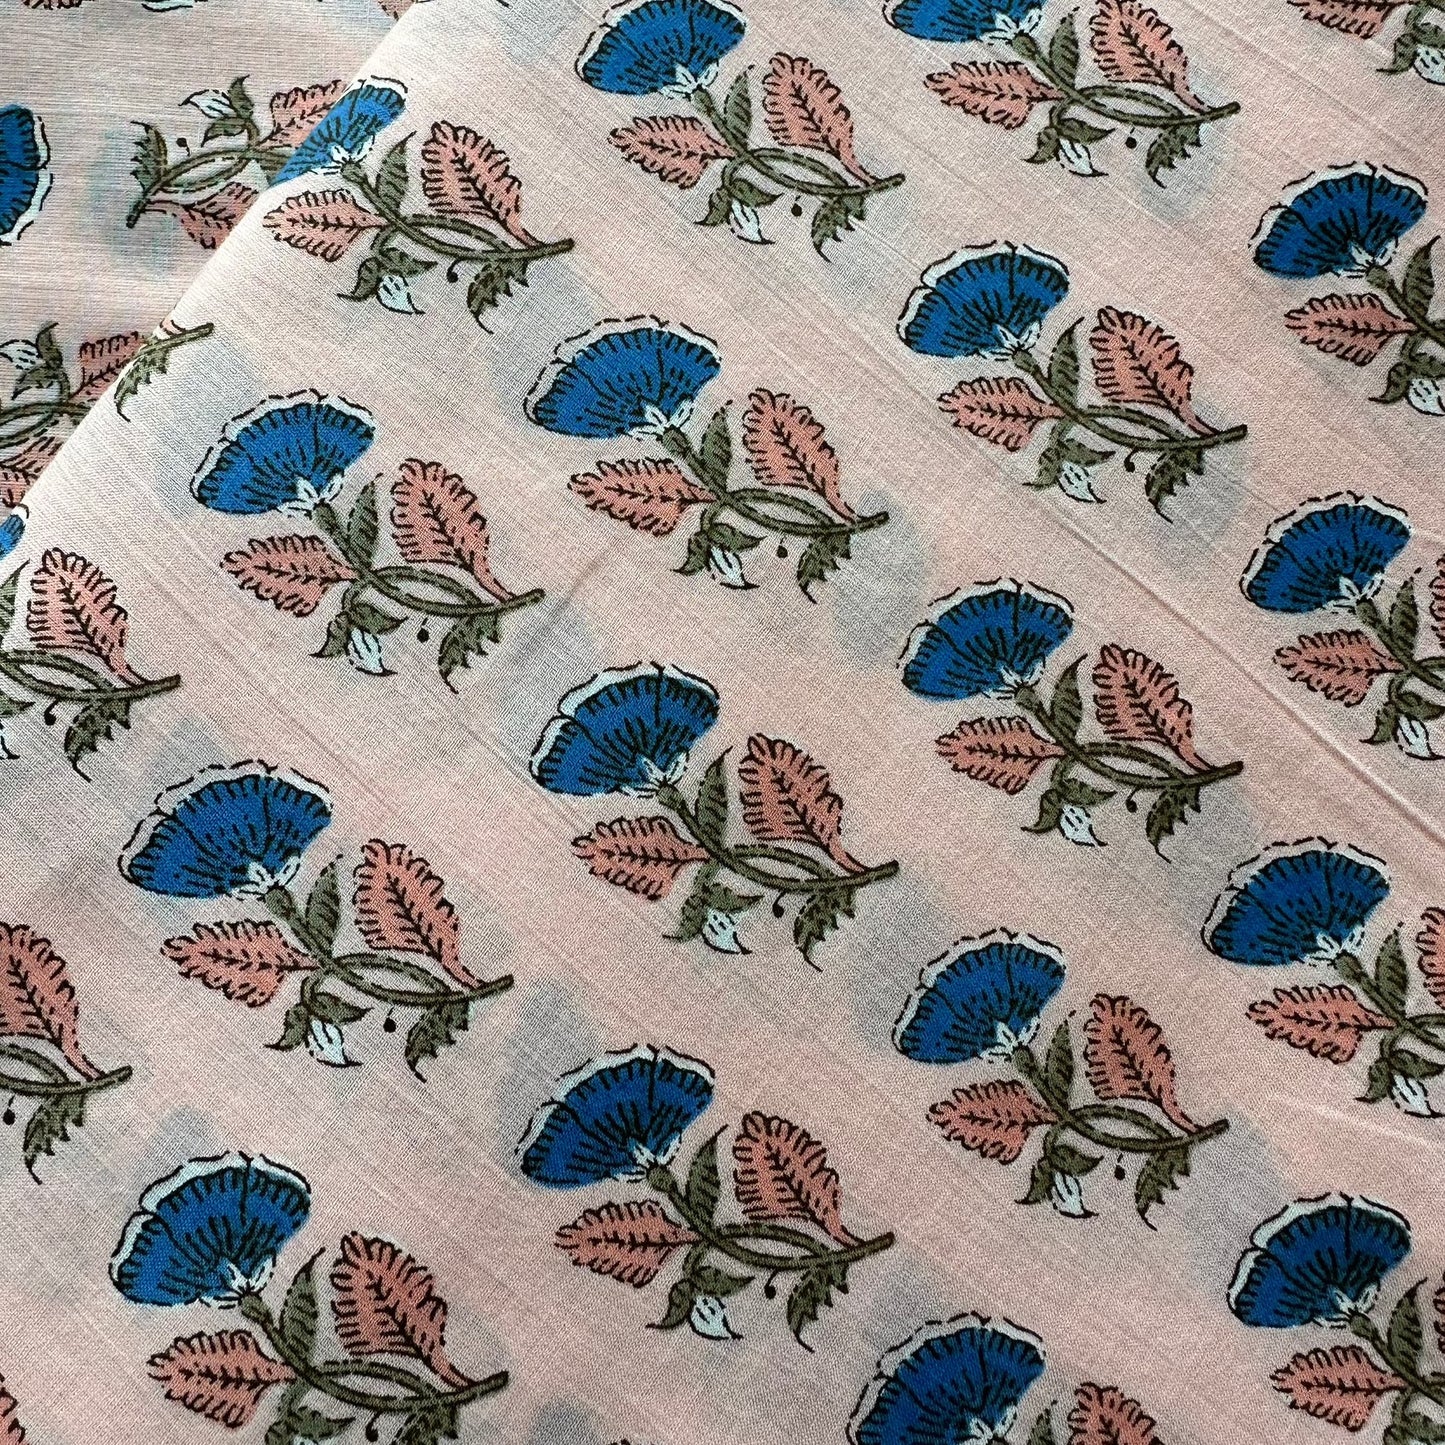 PRINTED INDIAN COTTON